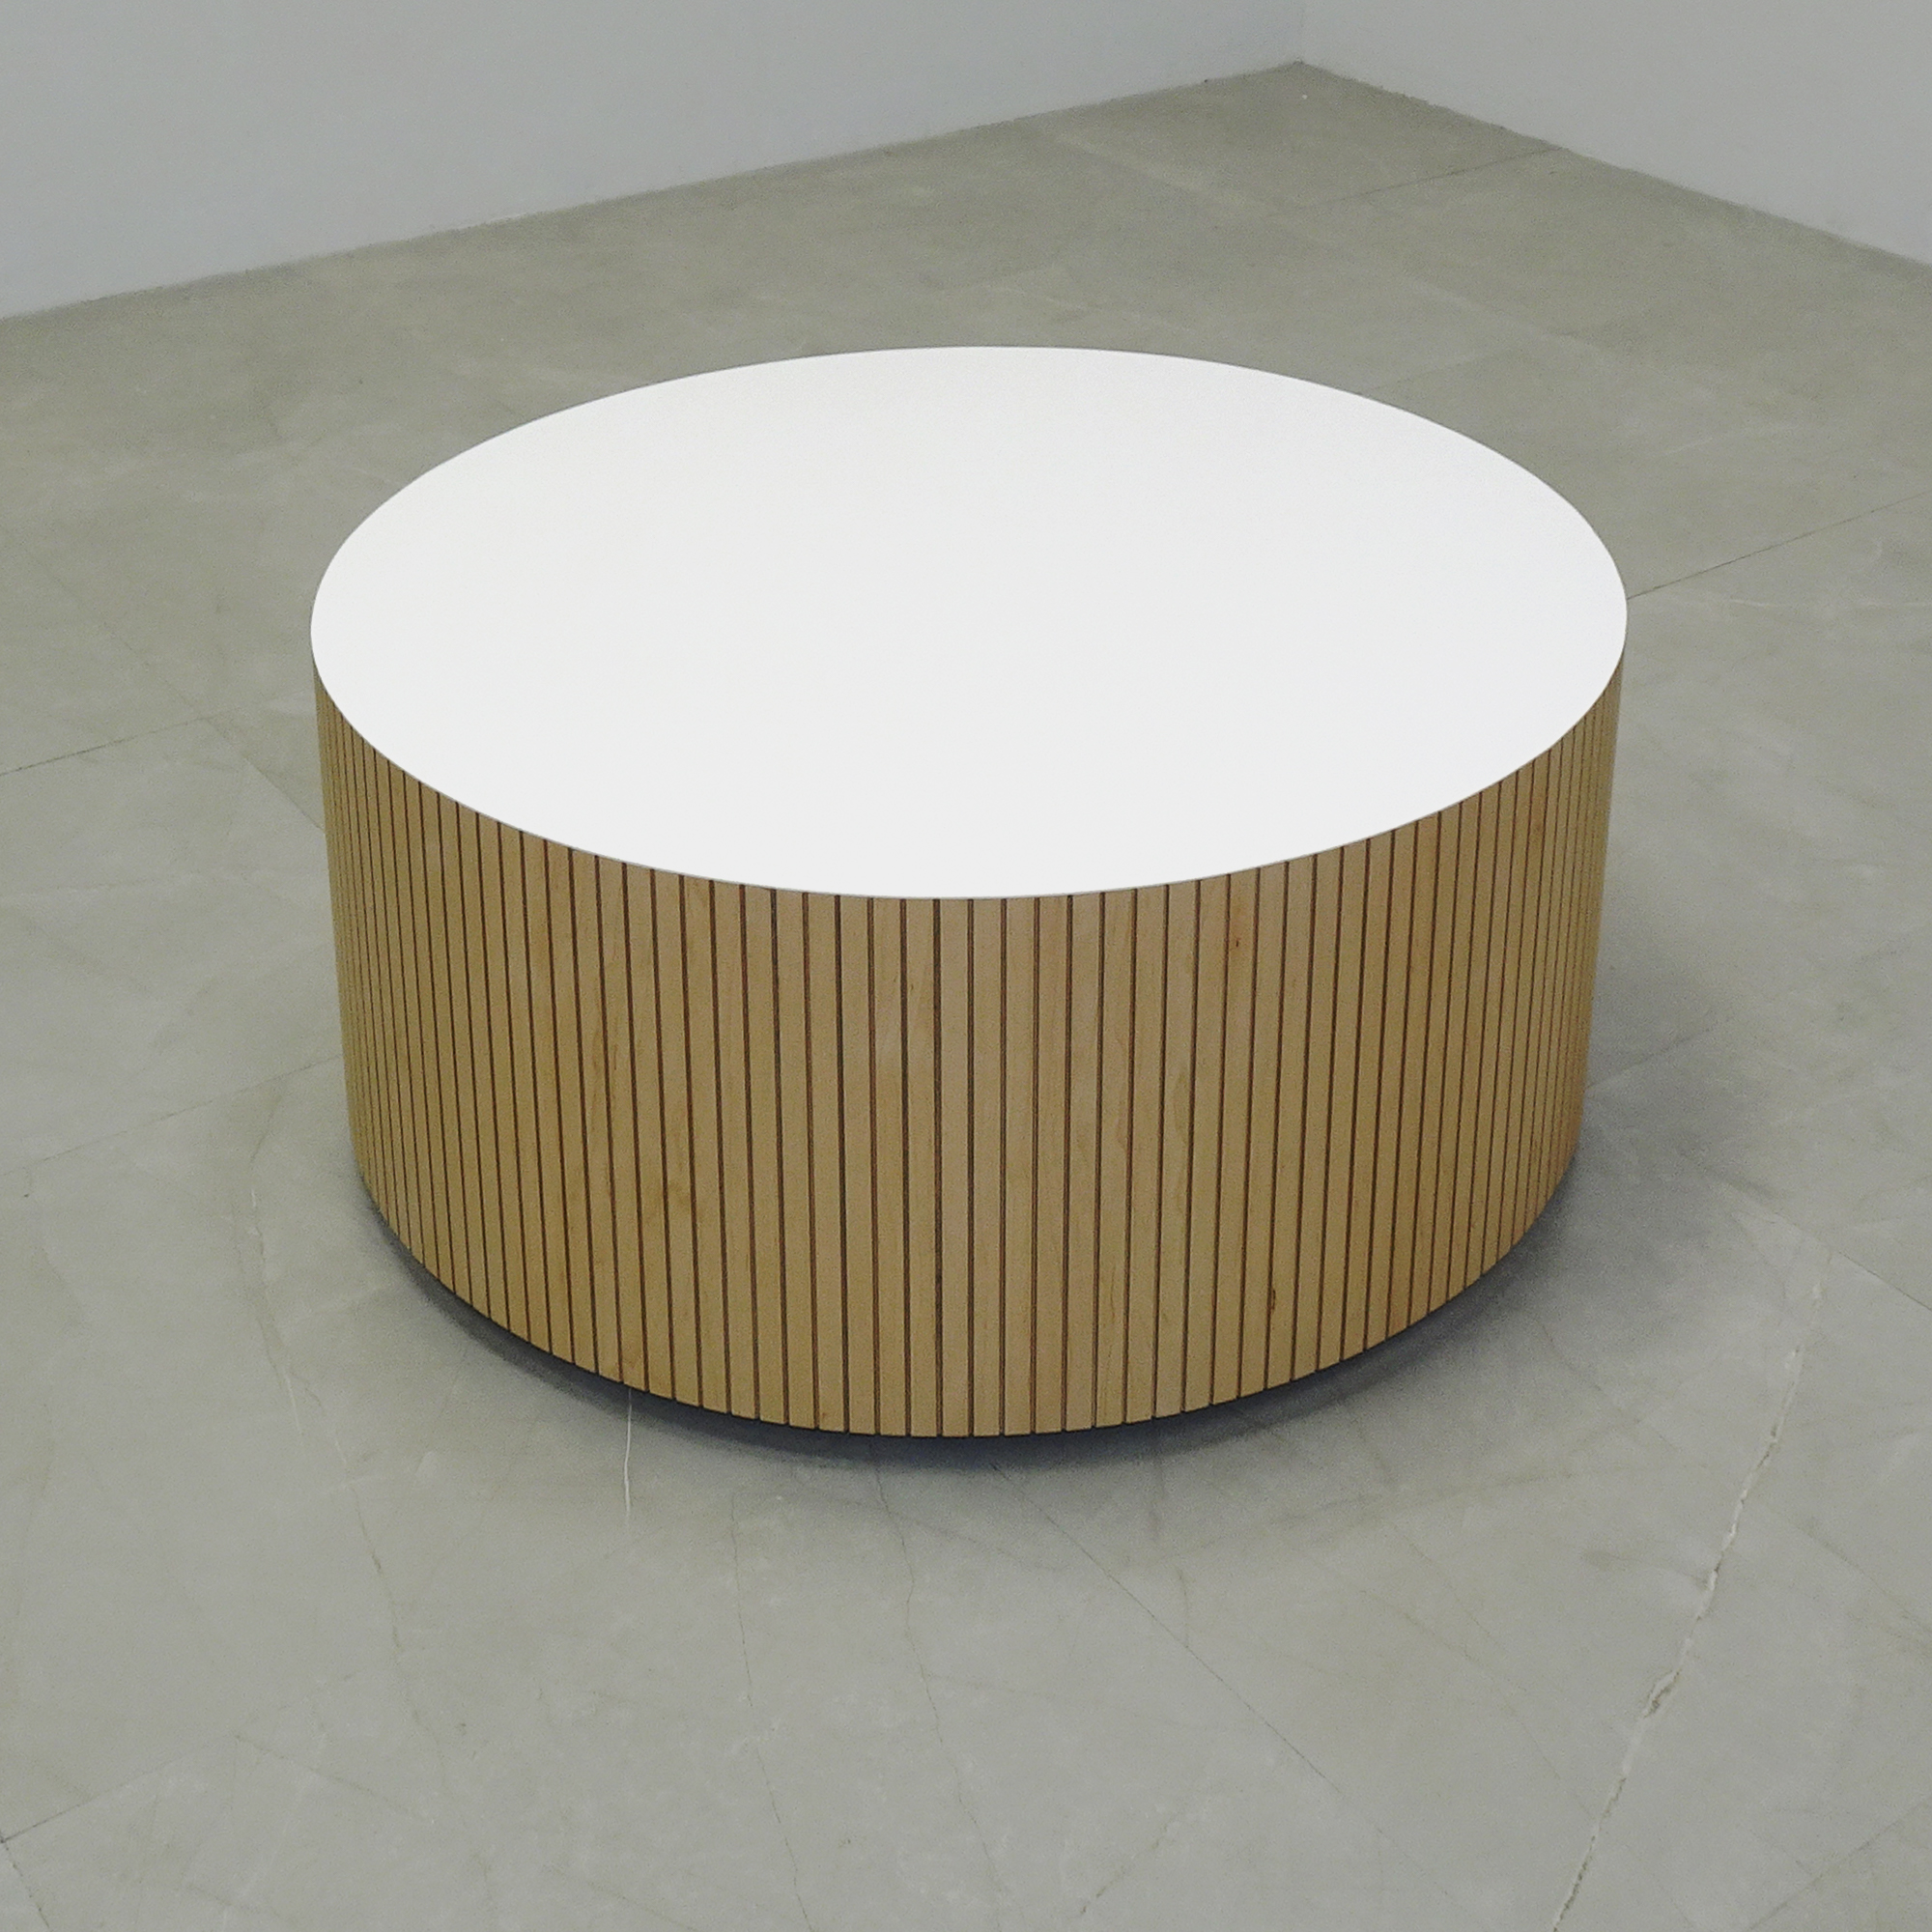 36-inch Norfolk Round Lobby Table in white gloss laminate table and maple tambour outside, shown here.